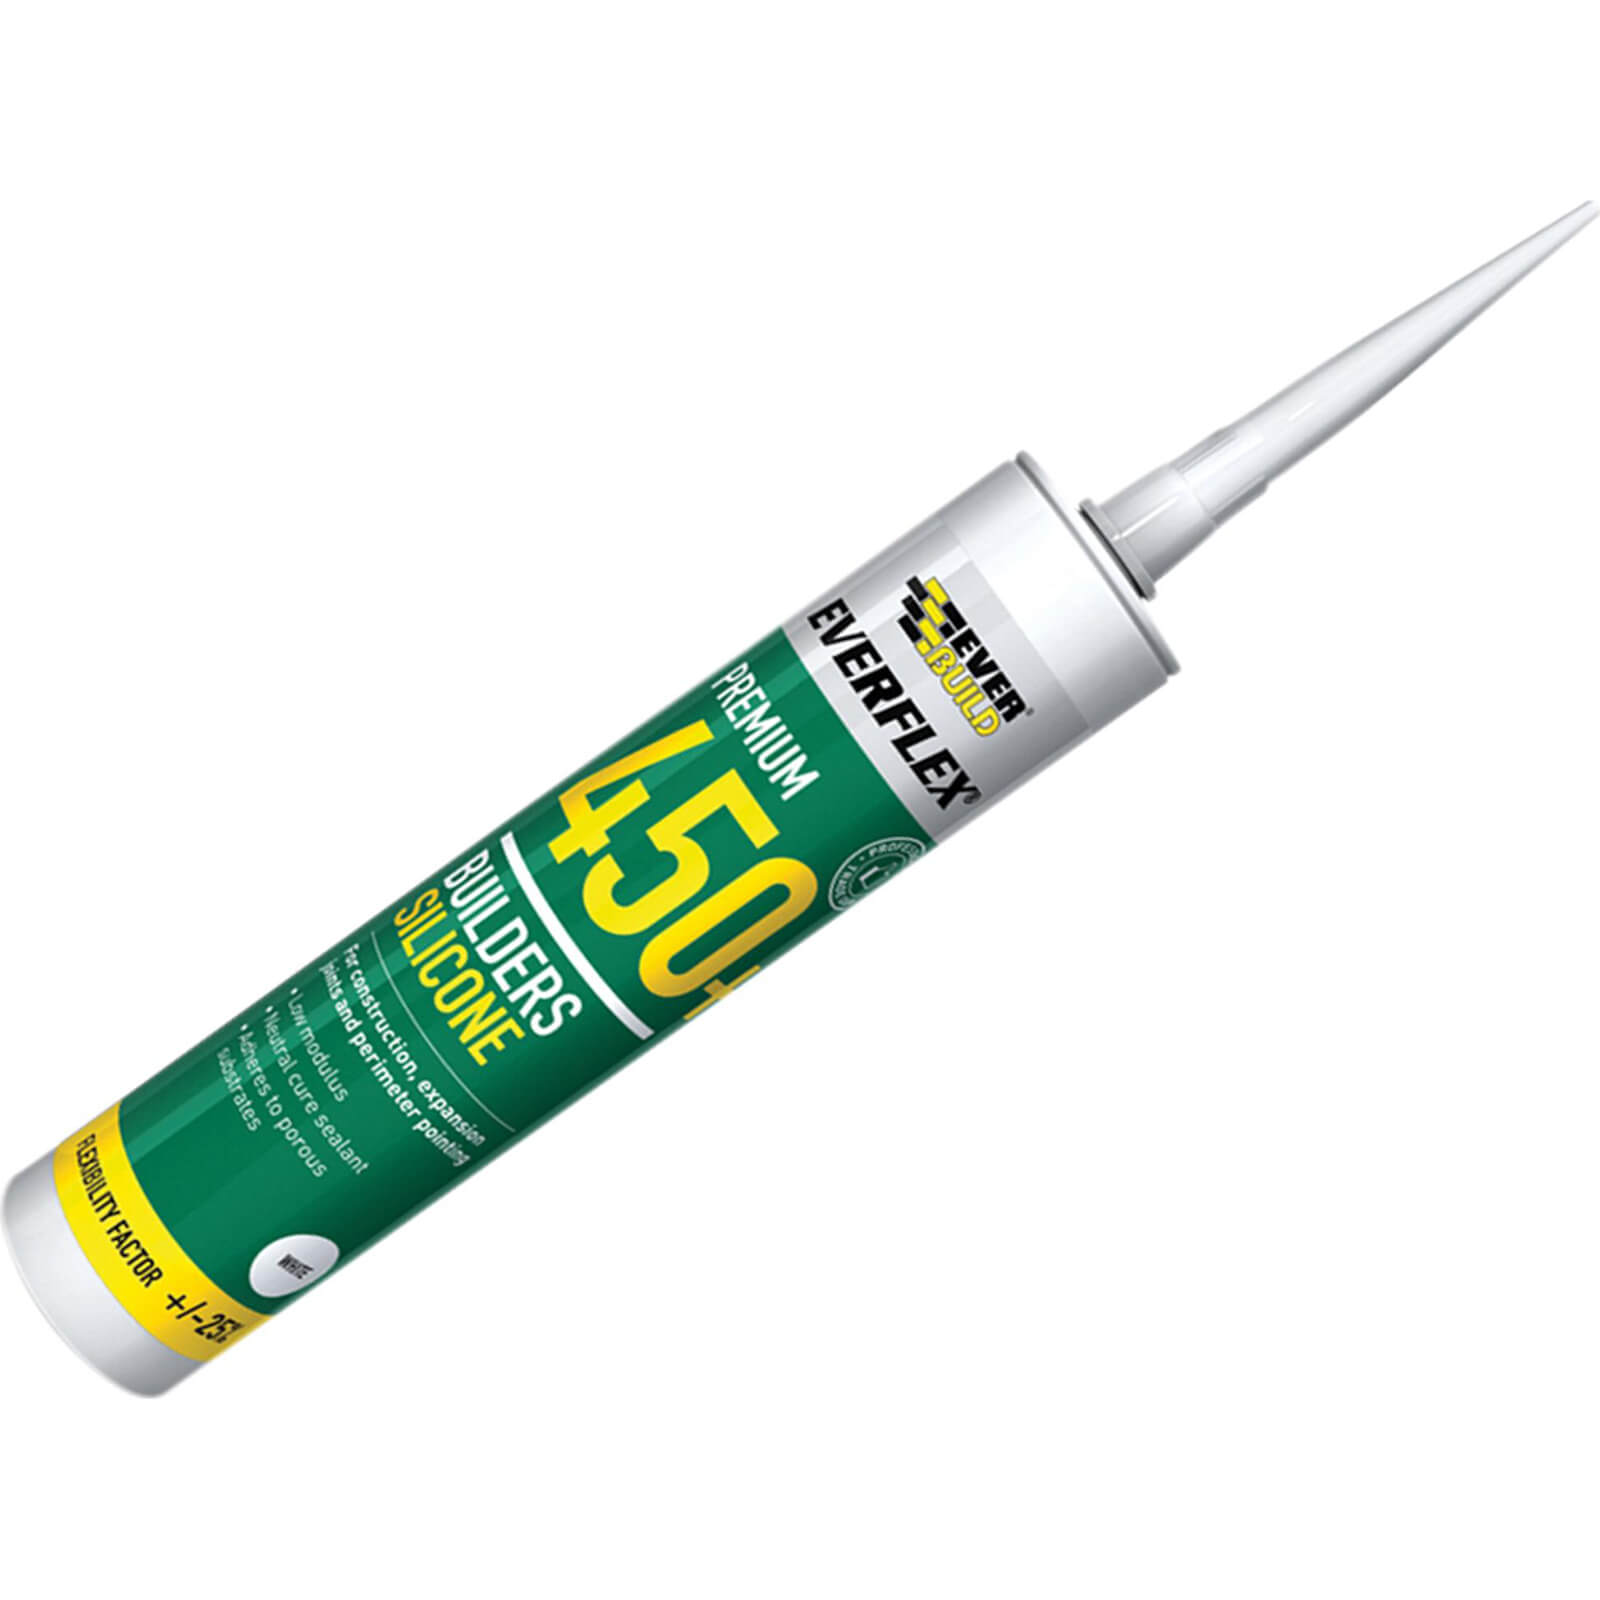 Image of Everbuild Builders Silicone Sealant Buff 310ml